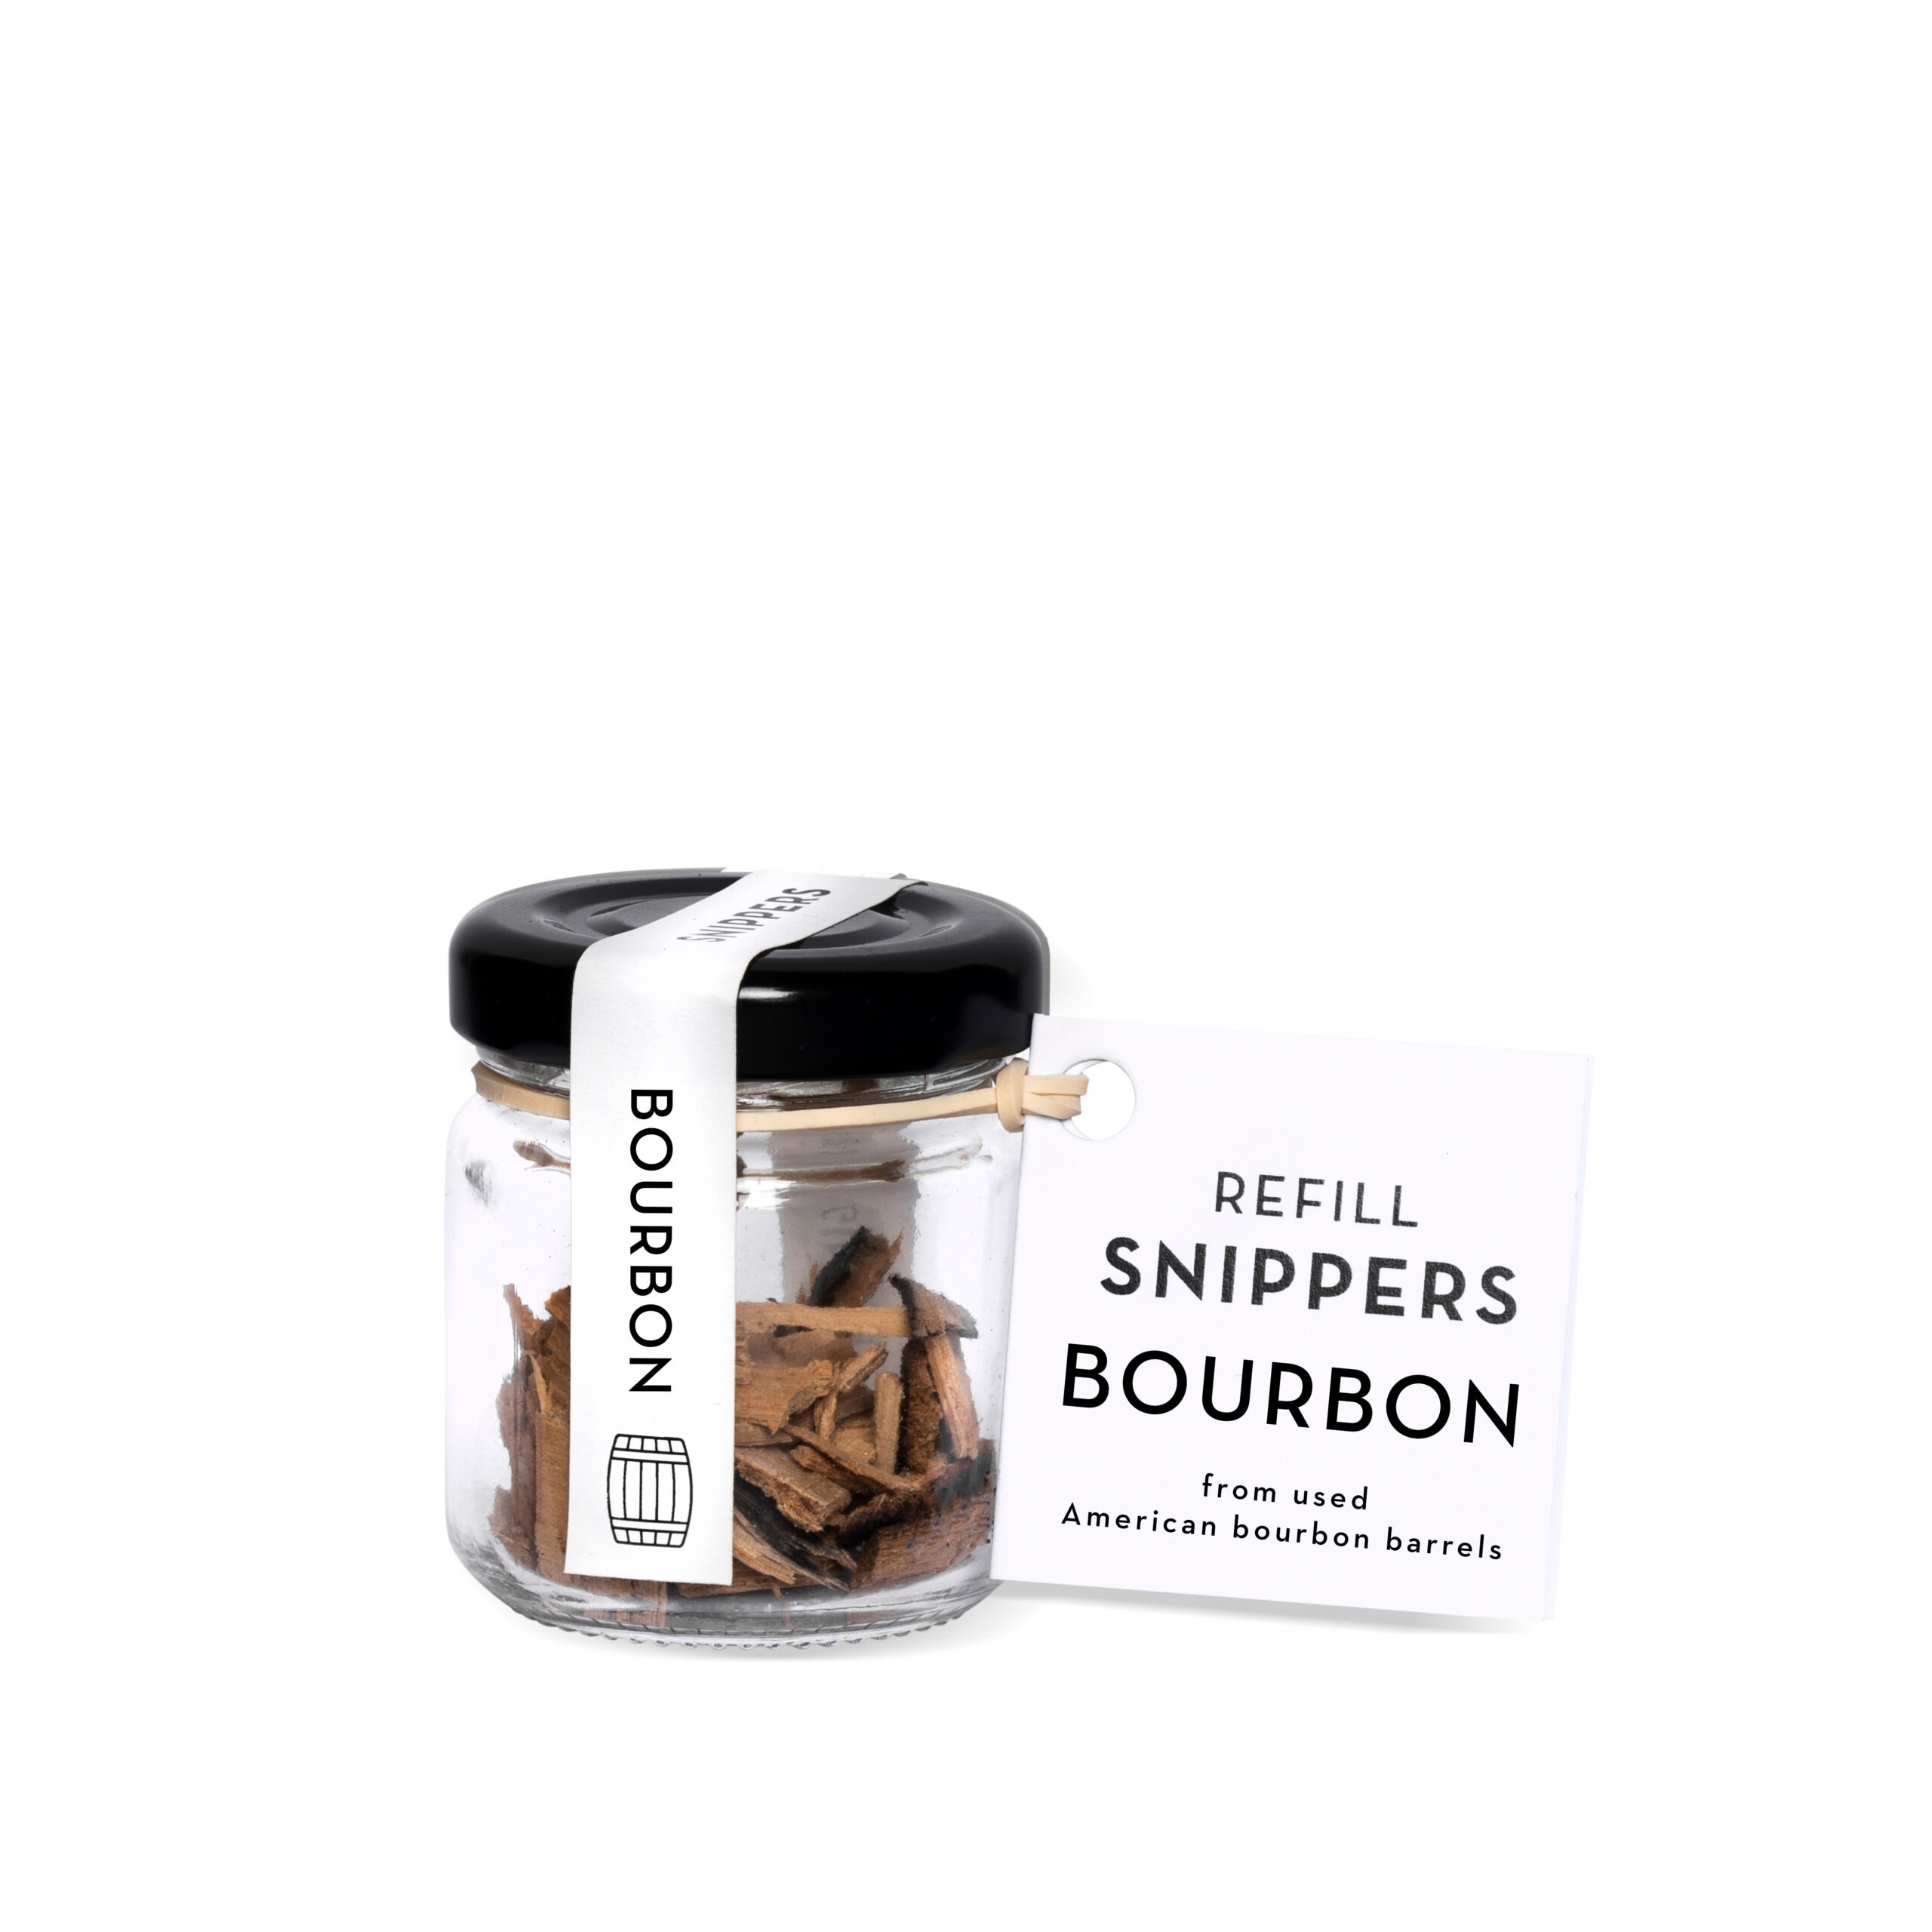 Snippers – Refill Bourbon